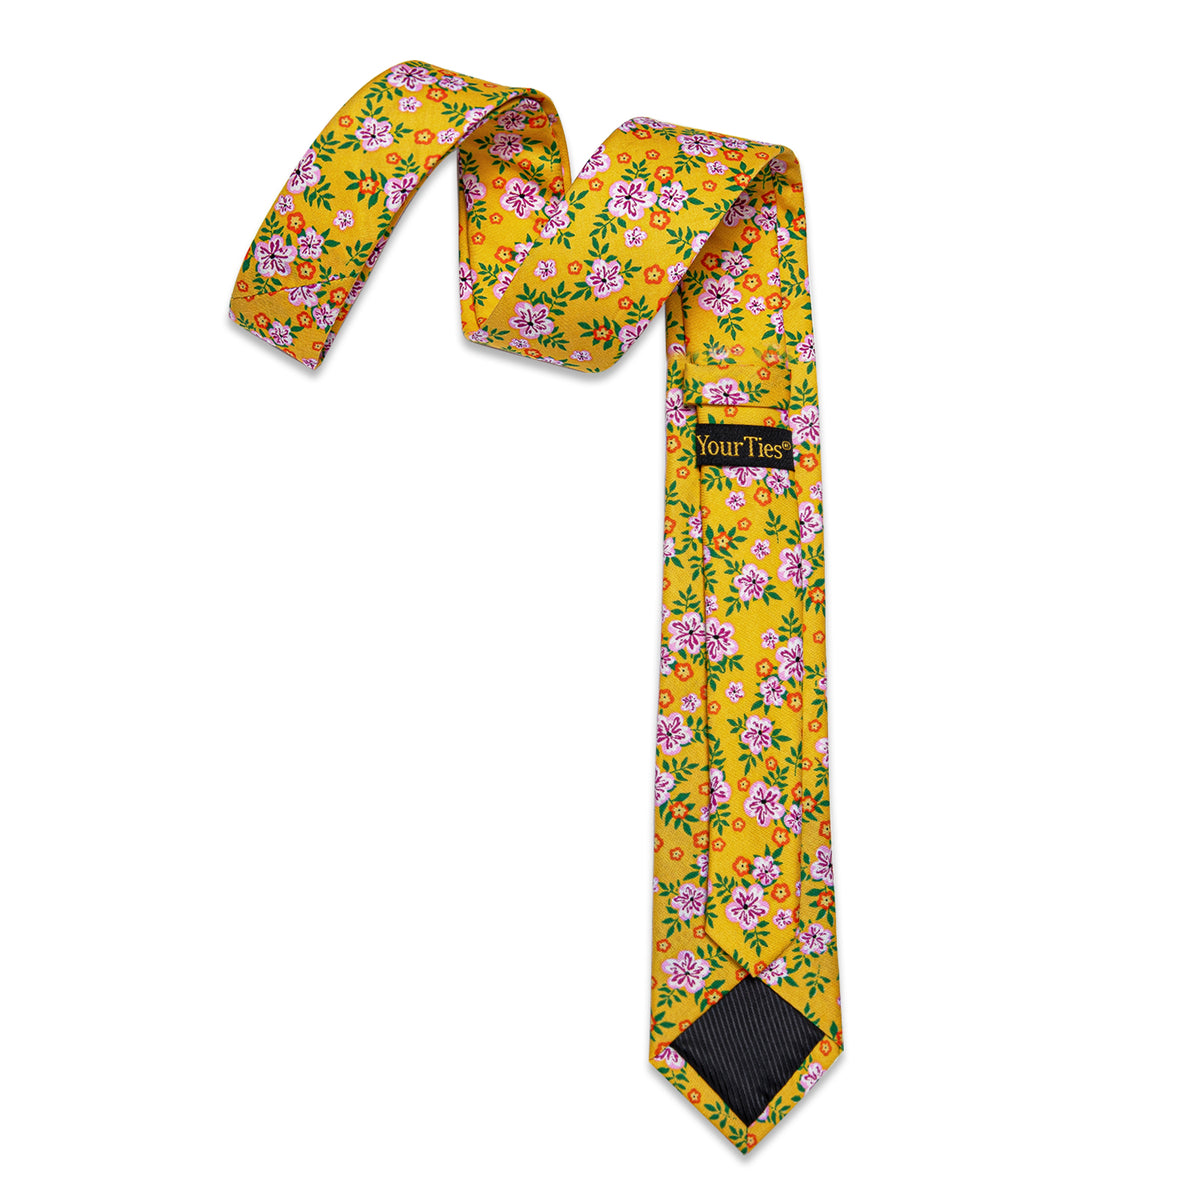 Noble Yellow Floral Printed Skinny Tie Set with Tie Clip